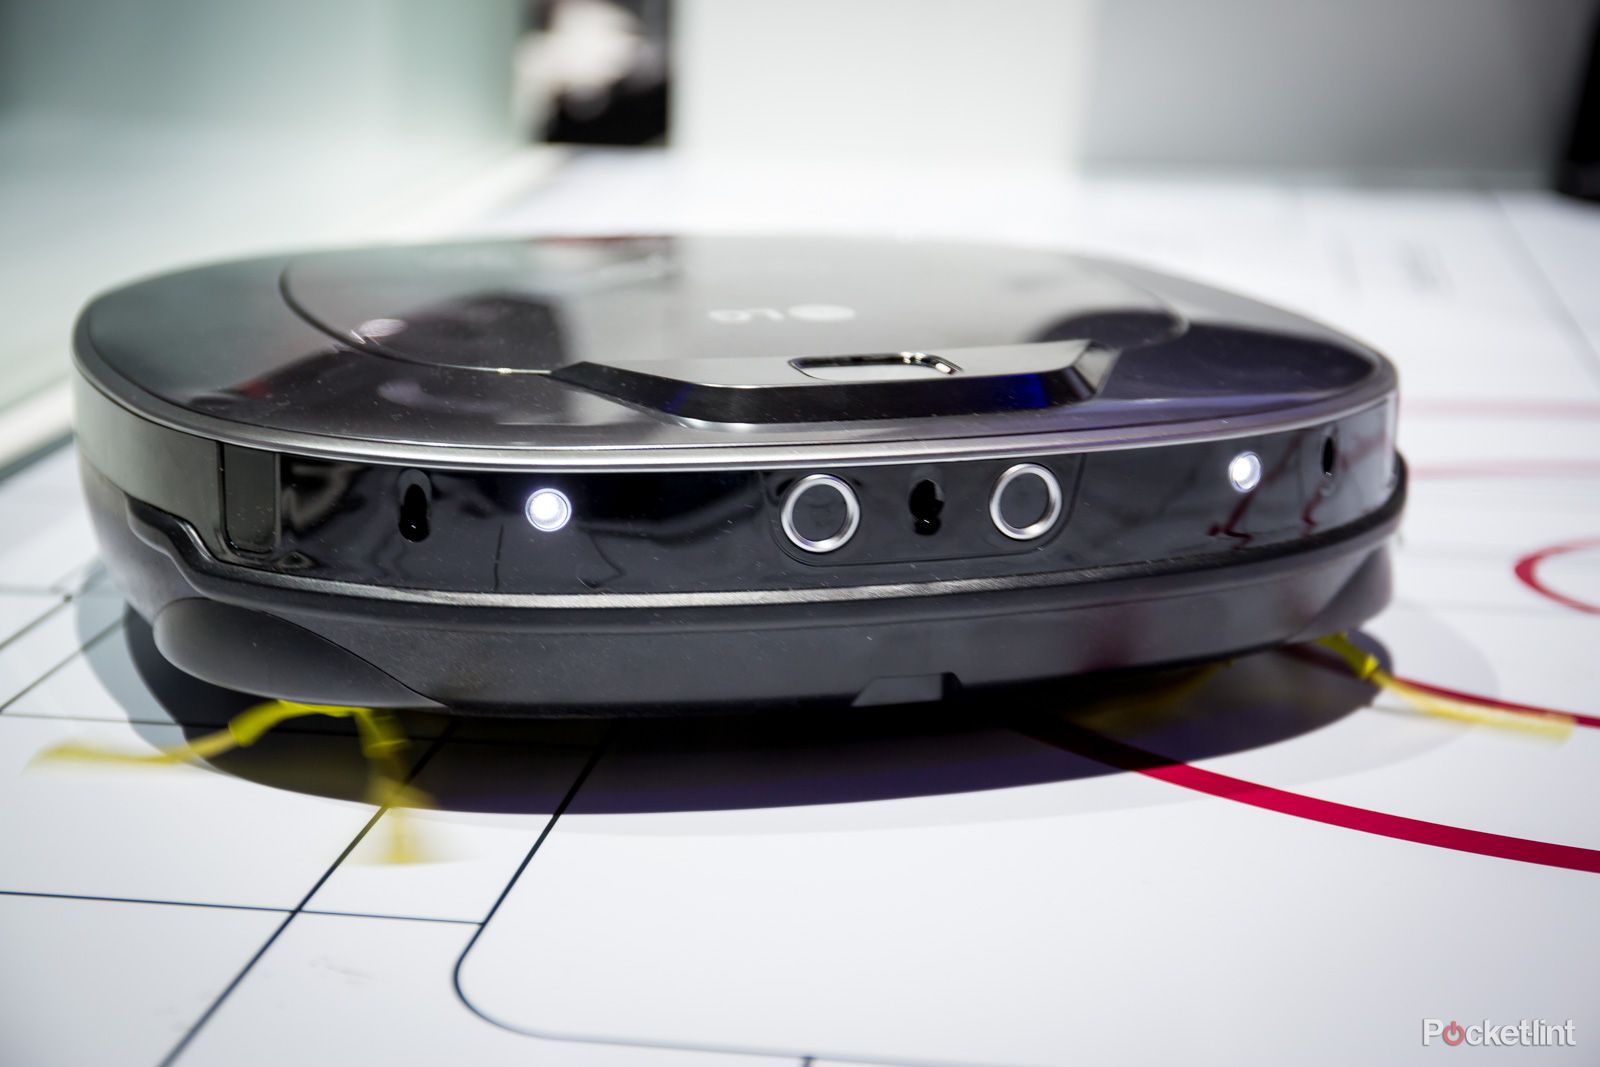 lg hom bot turbo robot vacuum puts the fun into cleaning here s why image 1